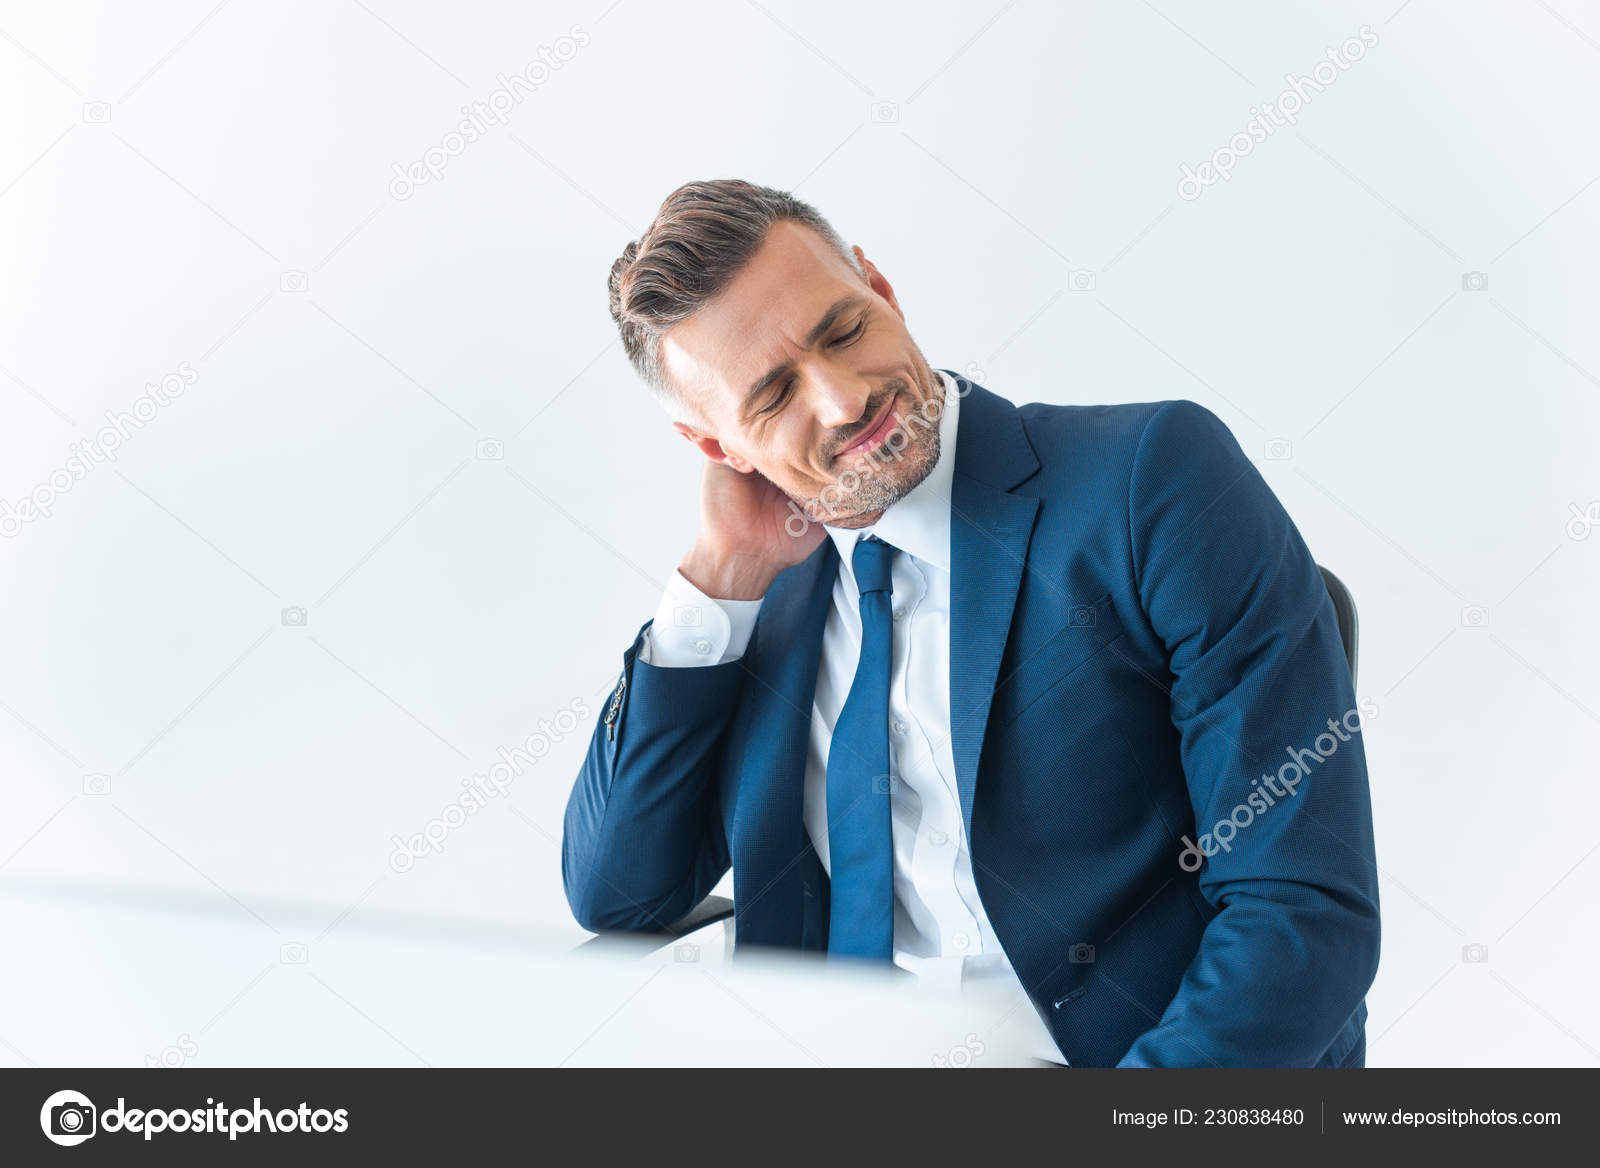 personnage - Mon personnage principal reste flou et intangible. - Page 2 Depositphotos_230838480-stock-photo-cheerful-tired-businessman-touching-neck